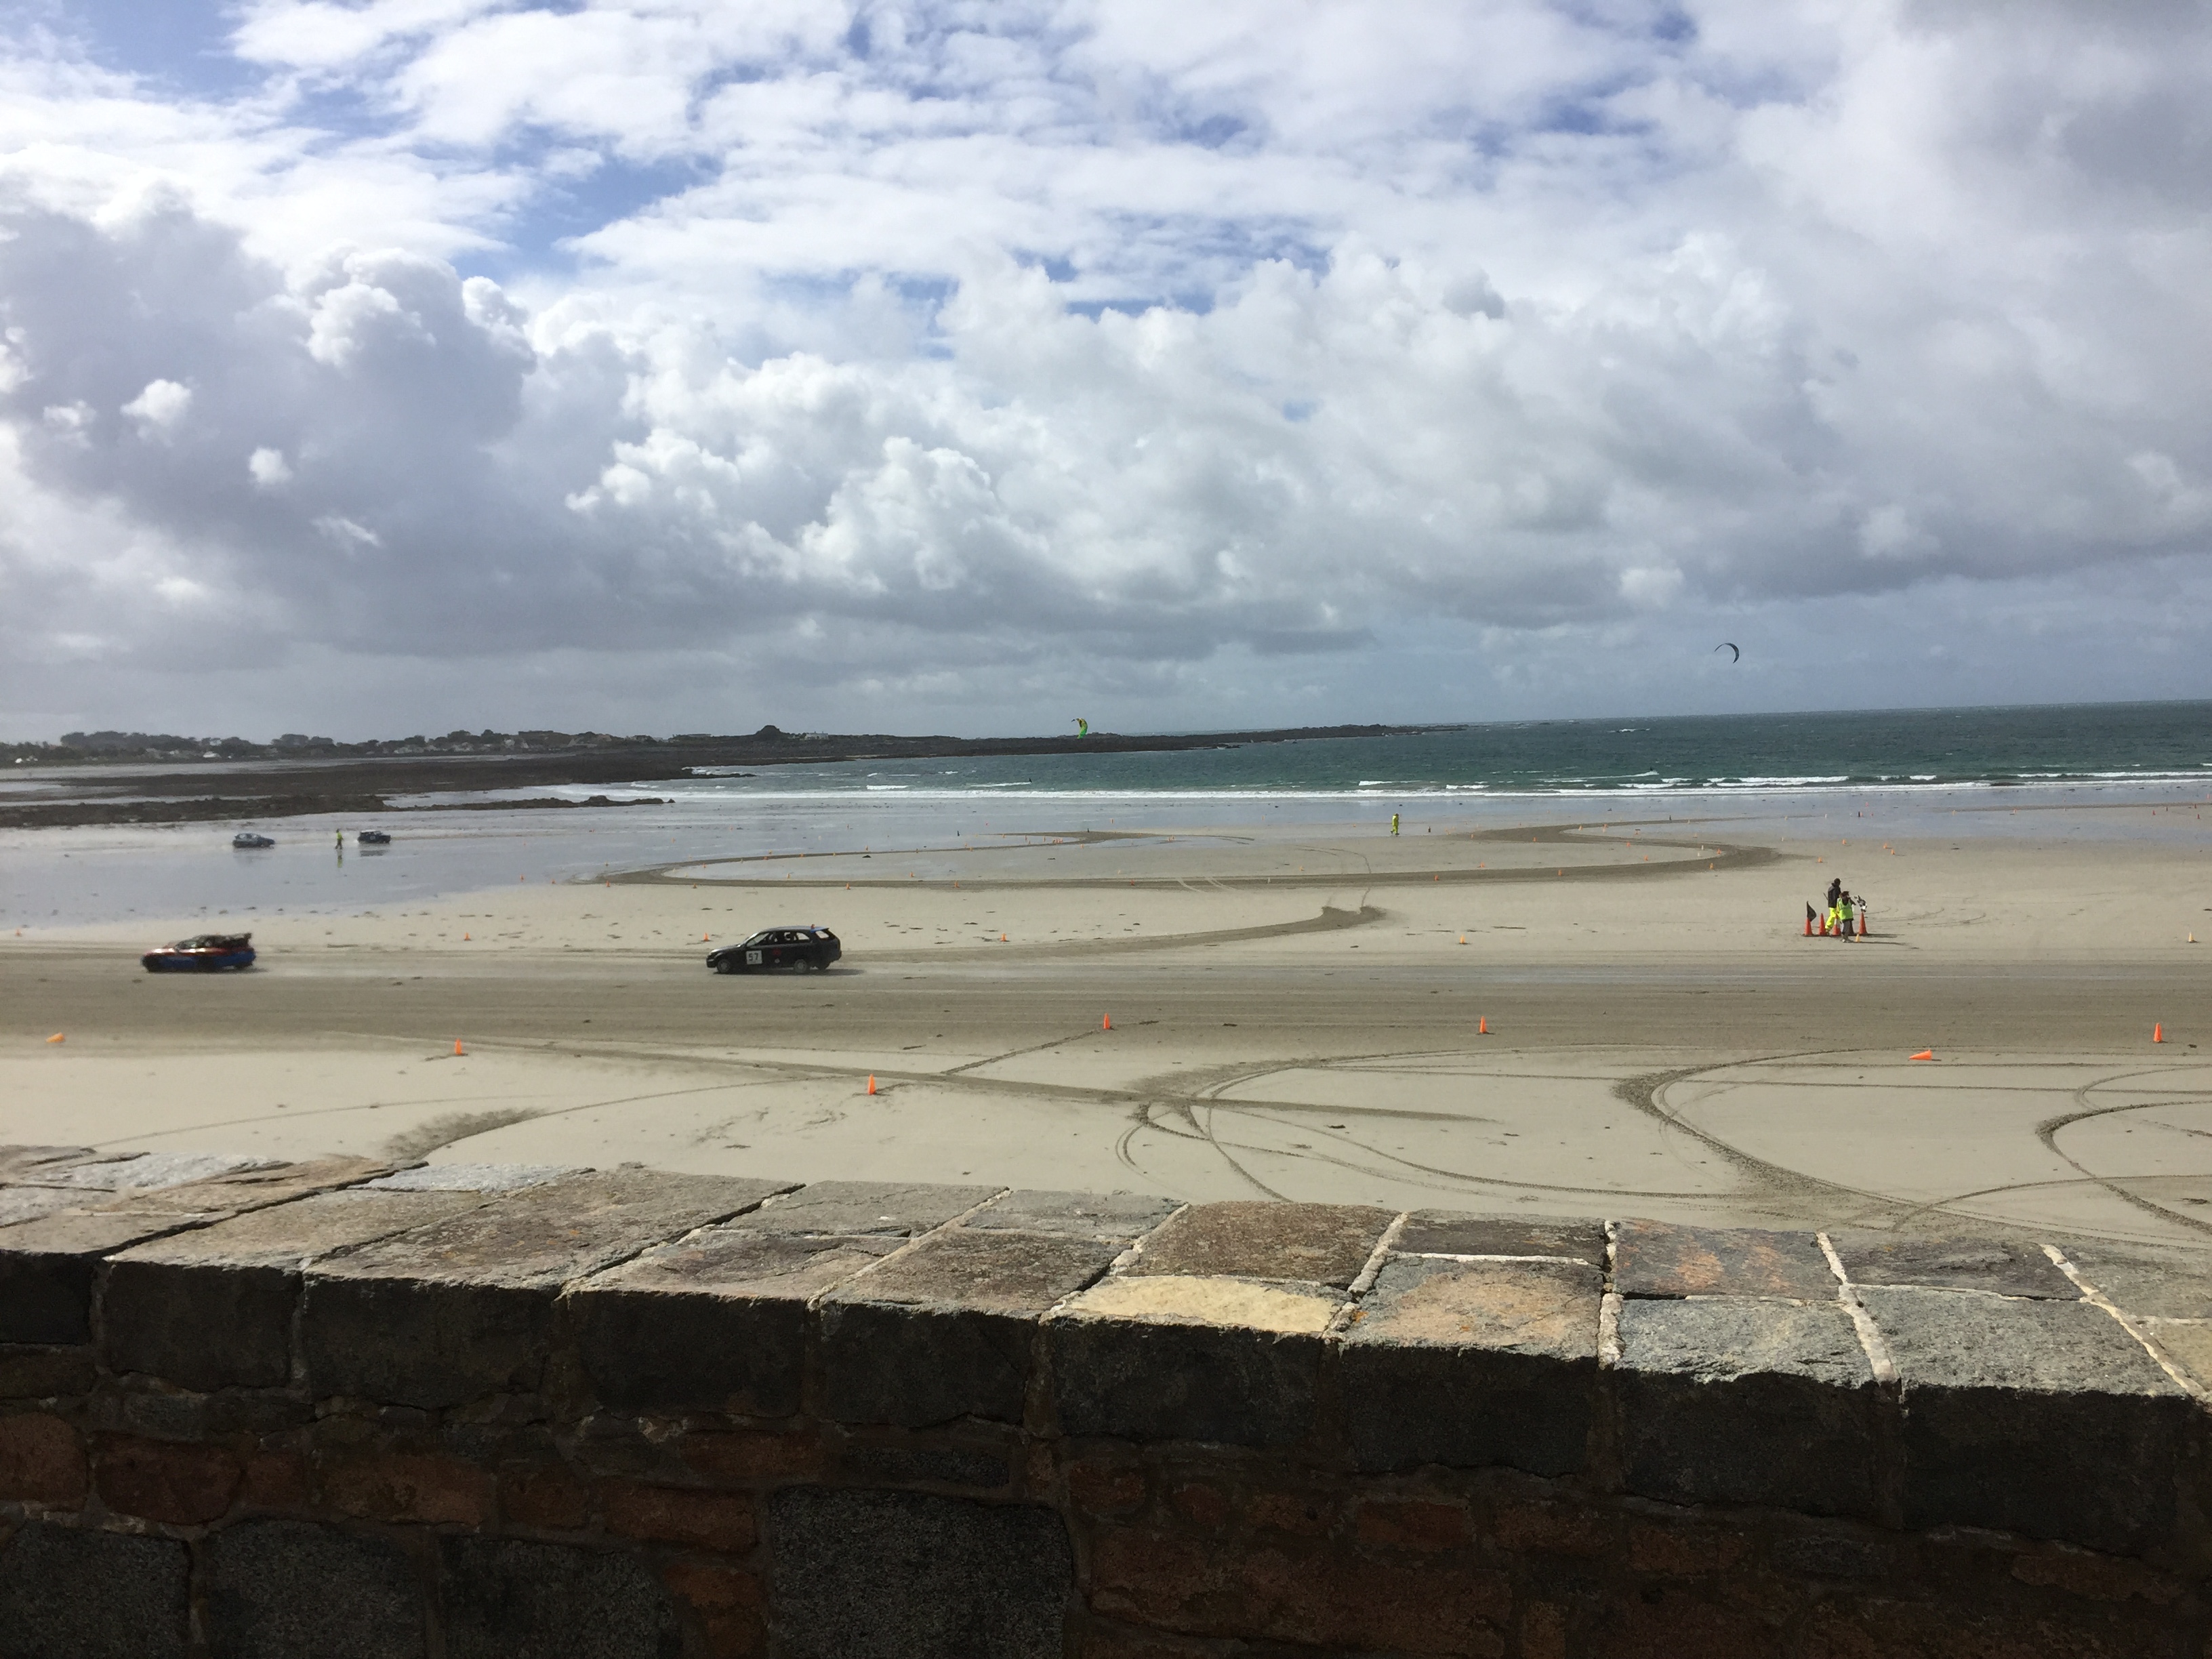 Cars racing in a circuit on the beach in Guernsey